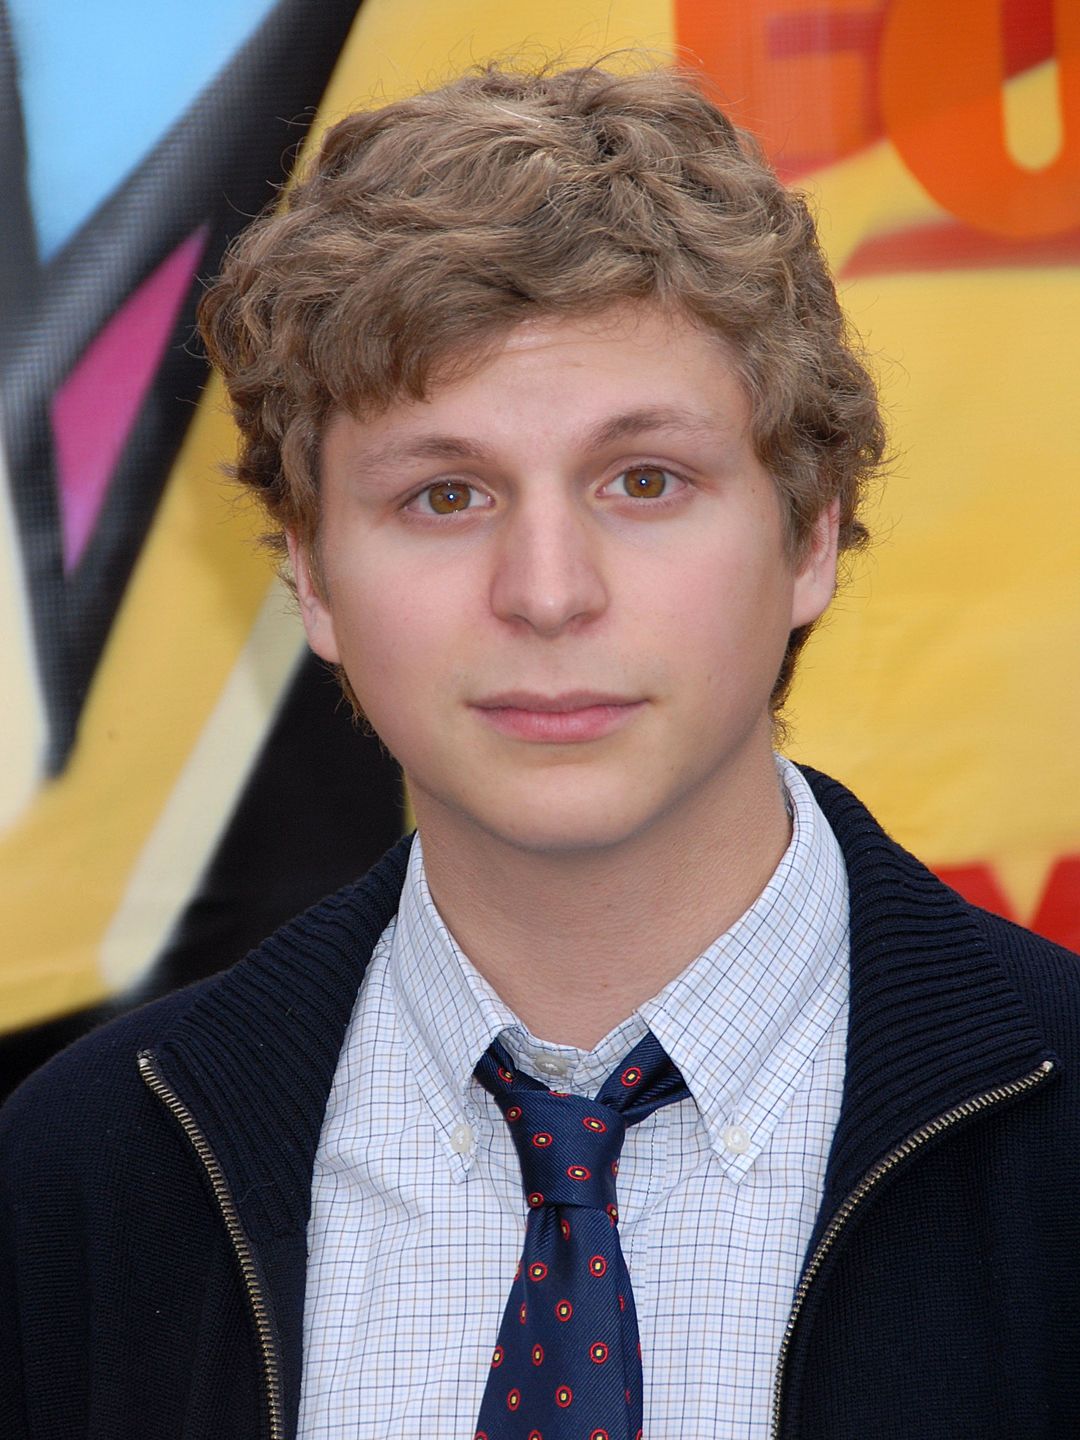 Michael Cera does he have a wife